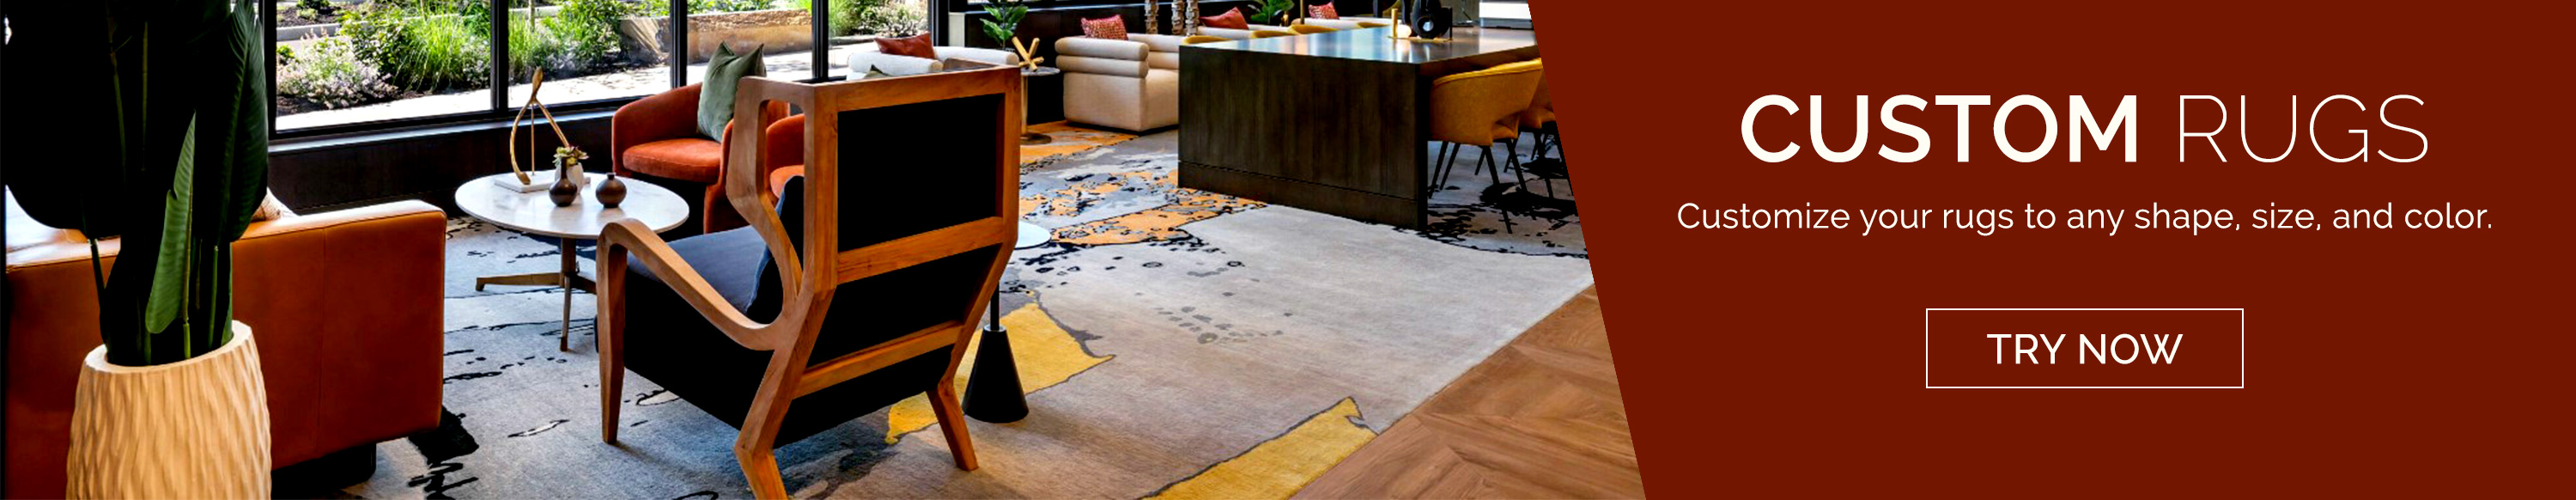 Custom rugs. Customize your rugs to any shape, size and color. Try now.